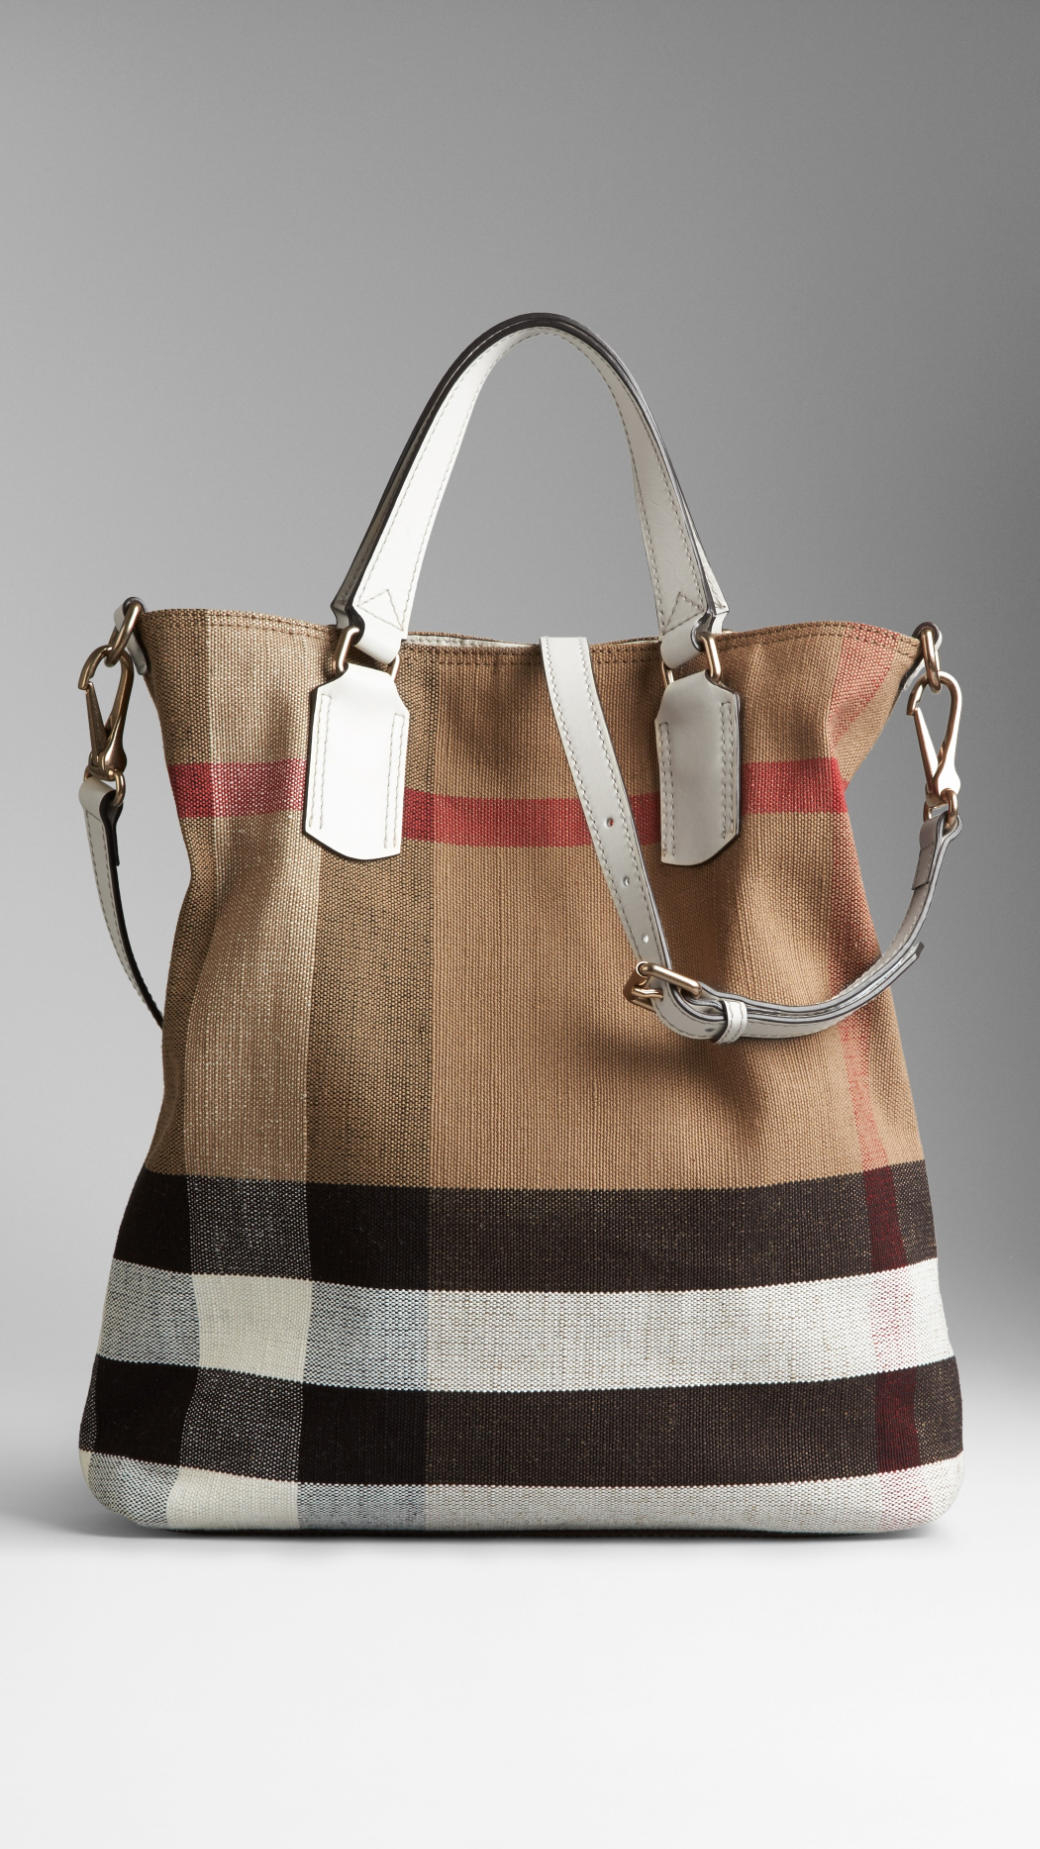 Burberry, Bags, Authentic Burberry Canvas Tote Bag